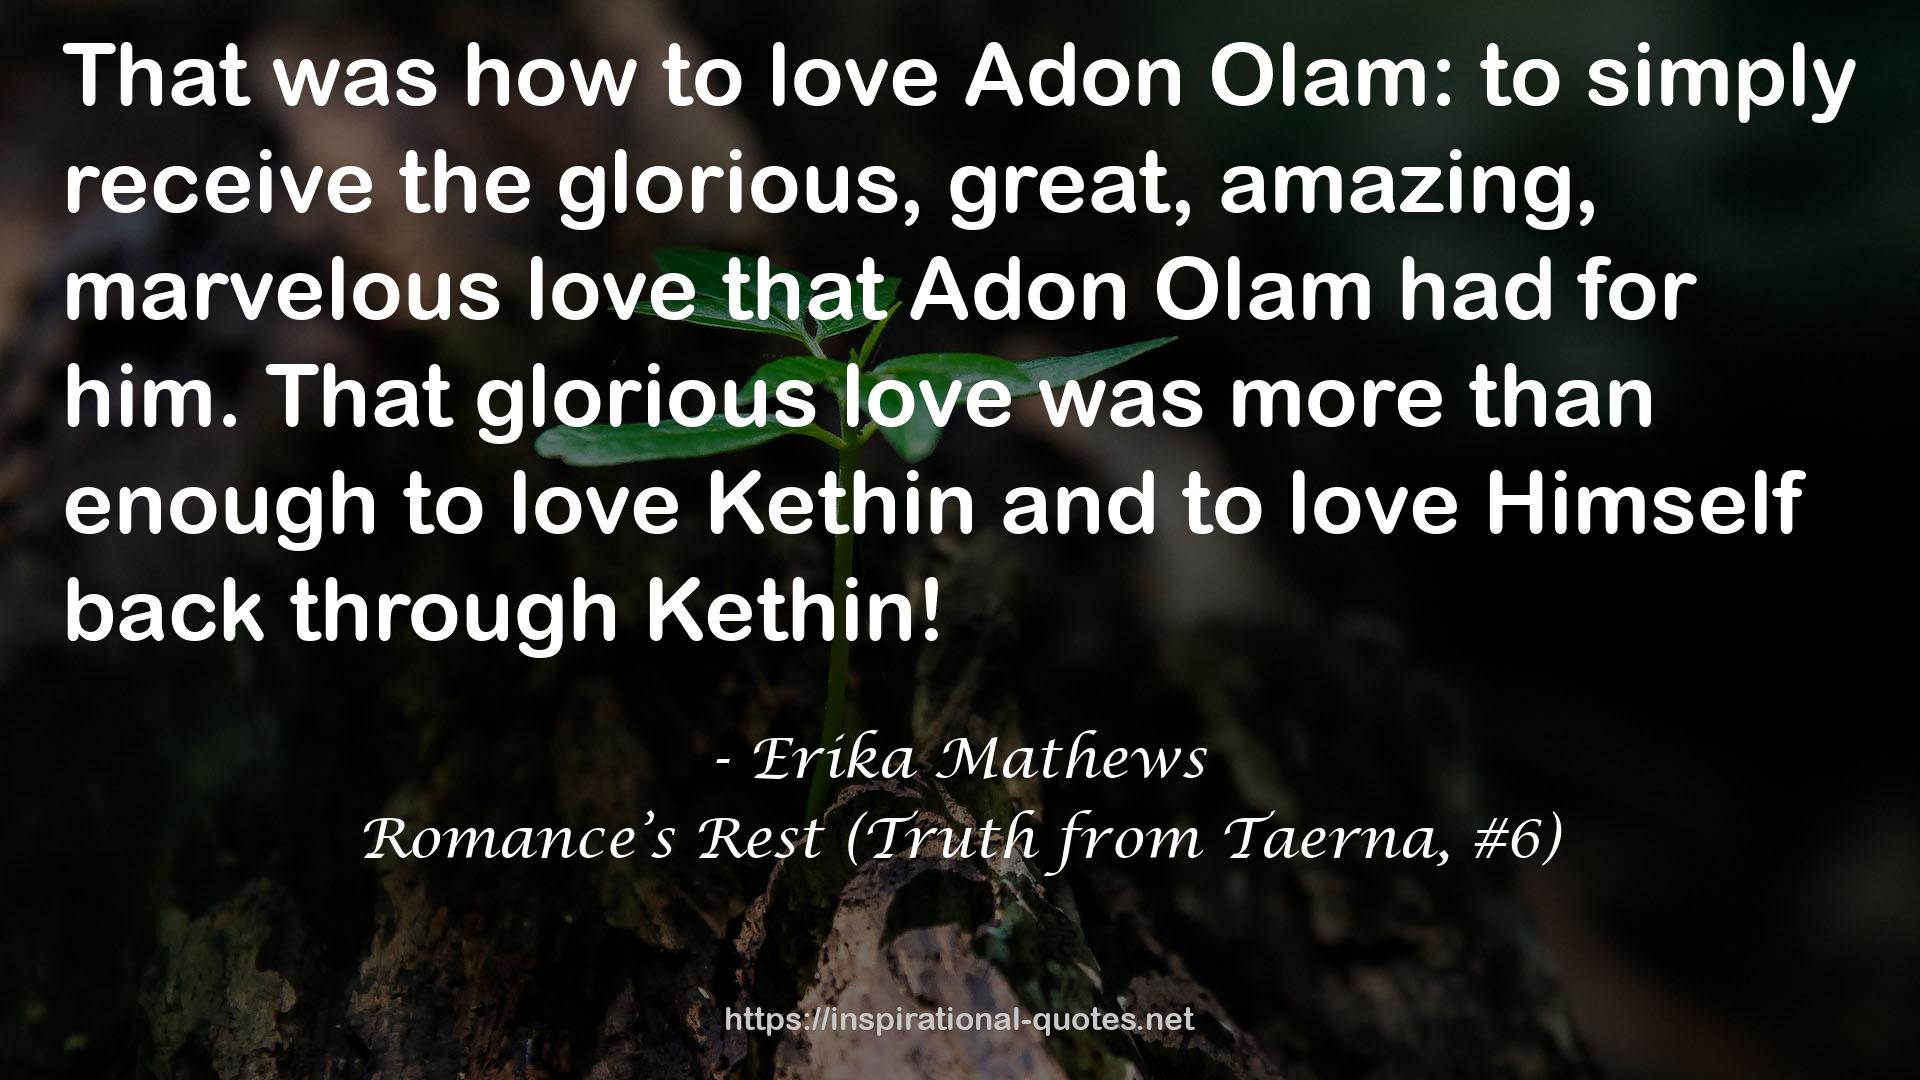 Romance’s Rest (Truth from Taerna, #6) QUOTES